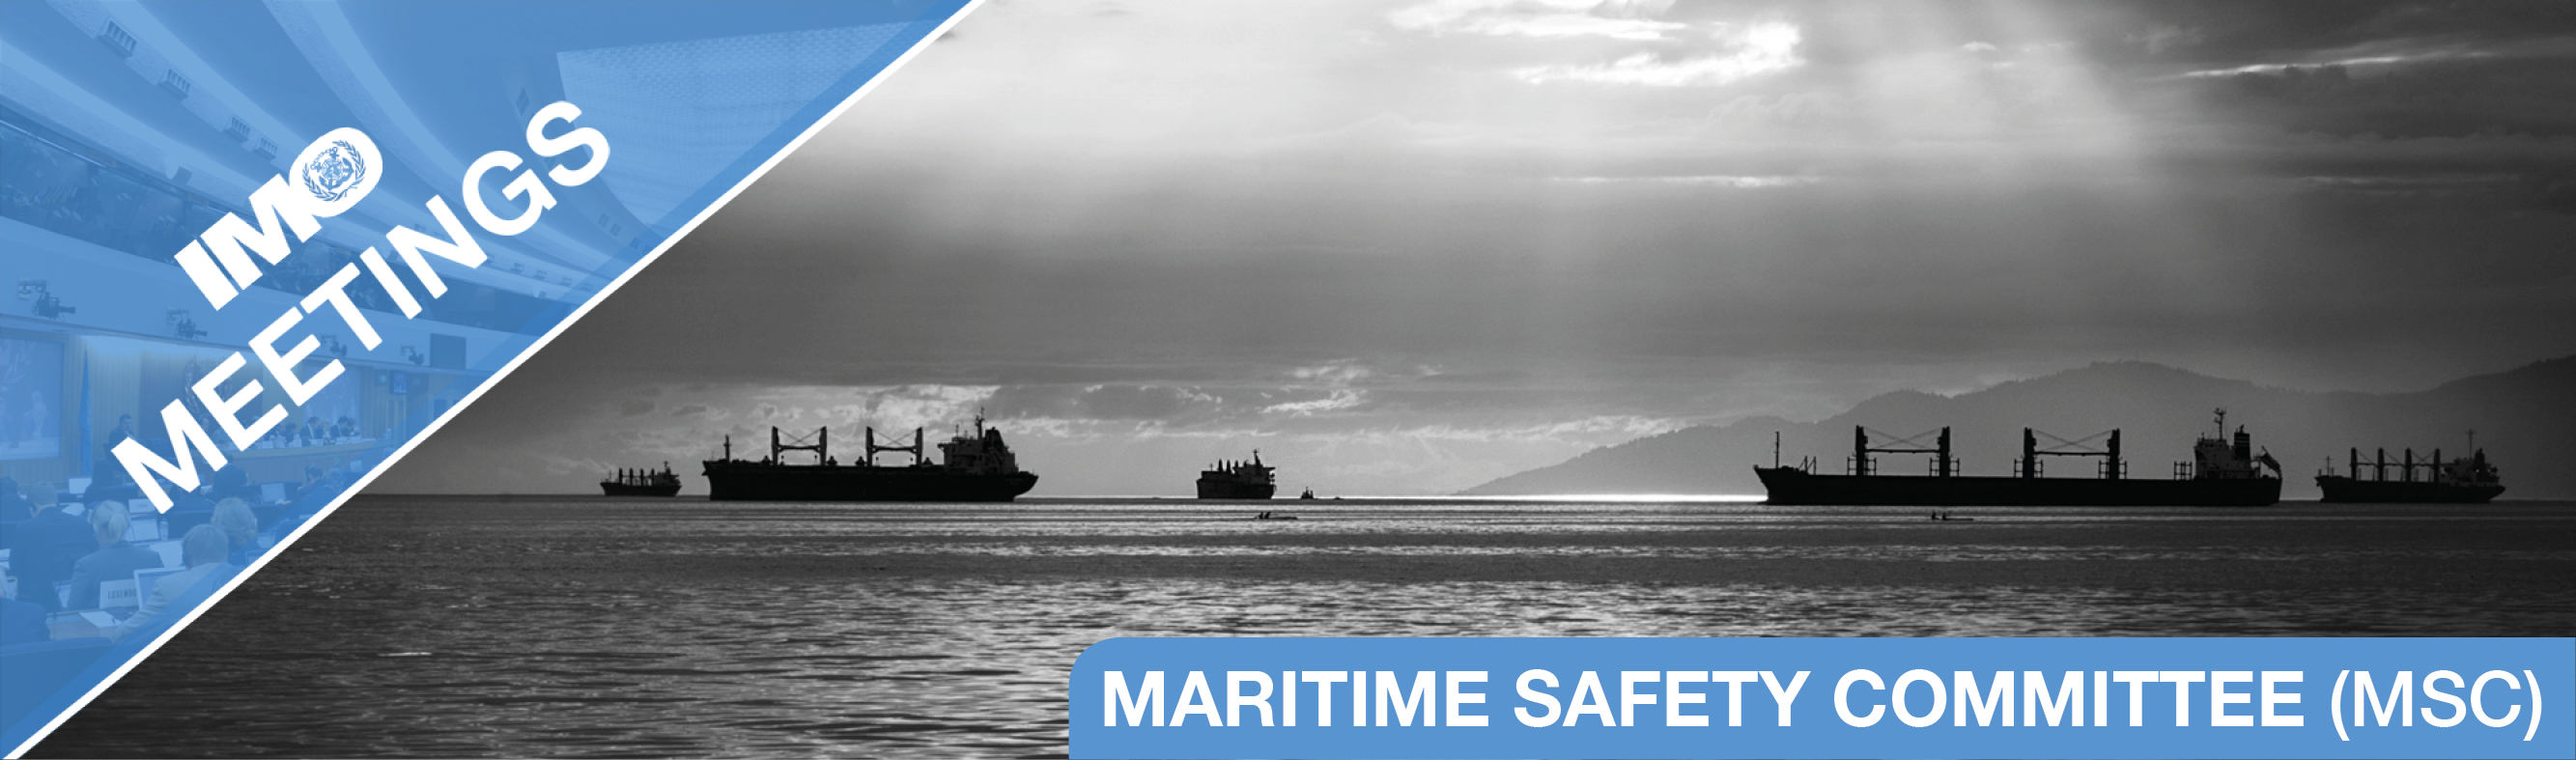 Maritime Safety Committee (MSC)